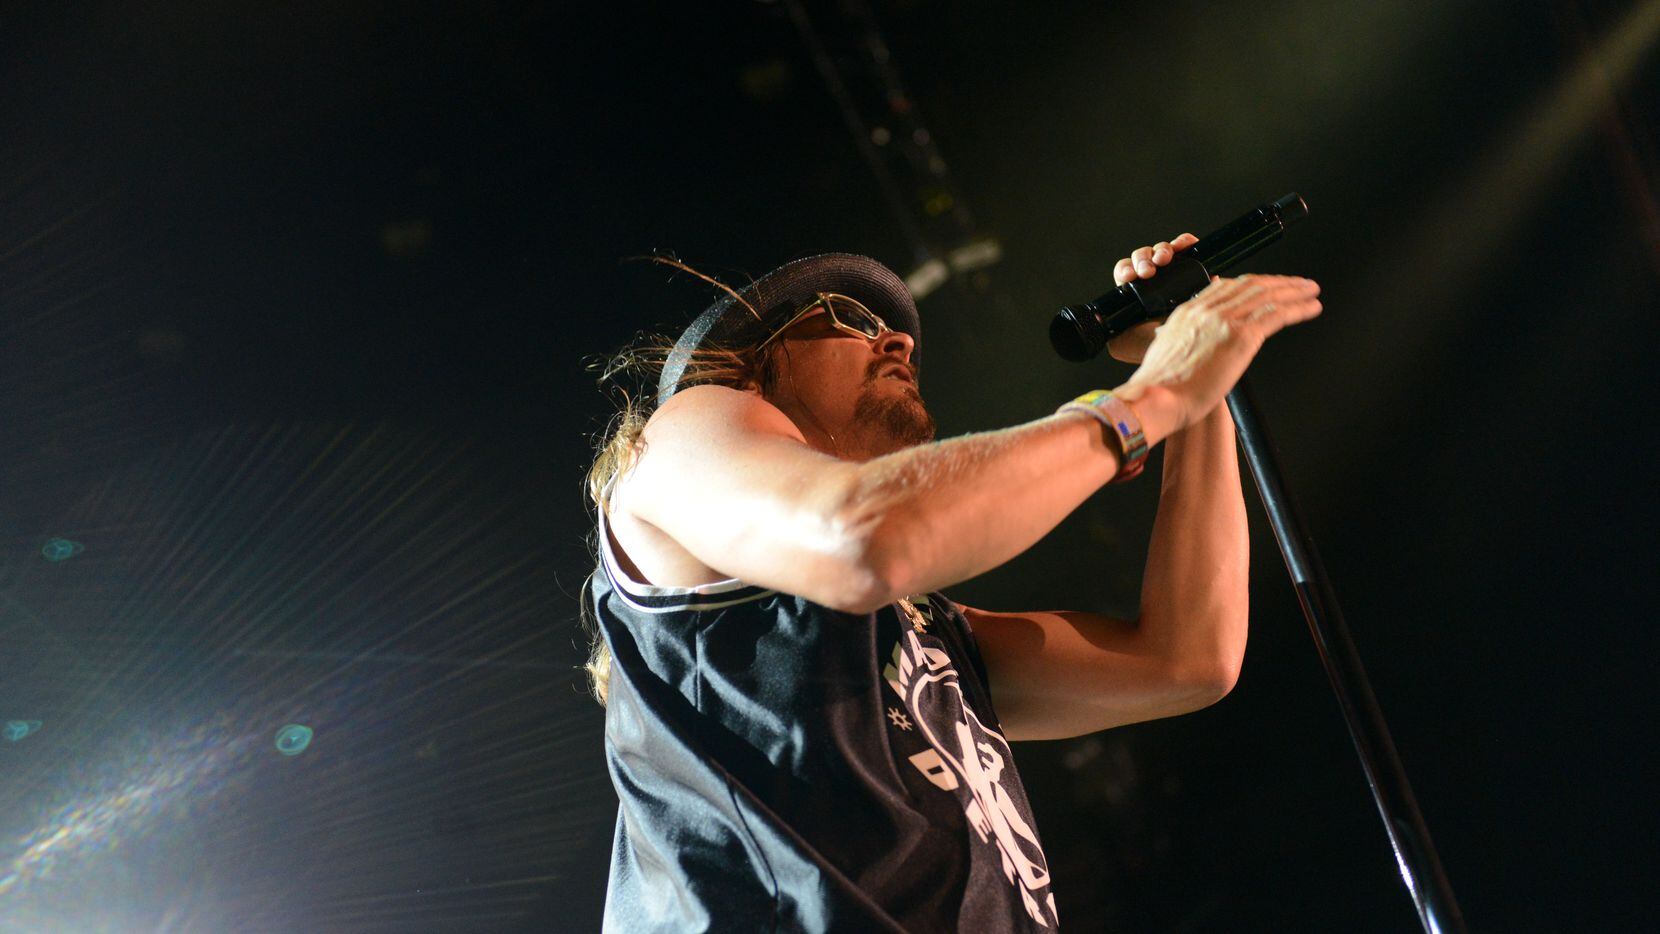 Kid Rock performs at the former Gexa Energy Pavilion in Dallas in 2013.